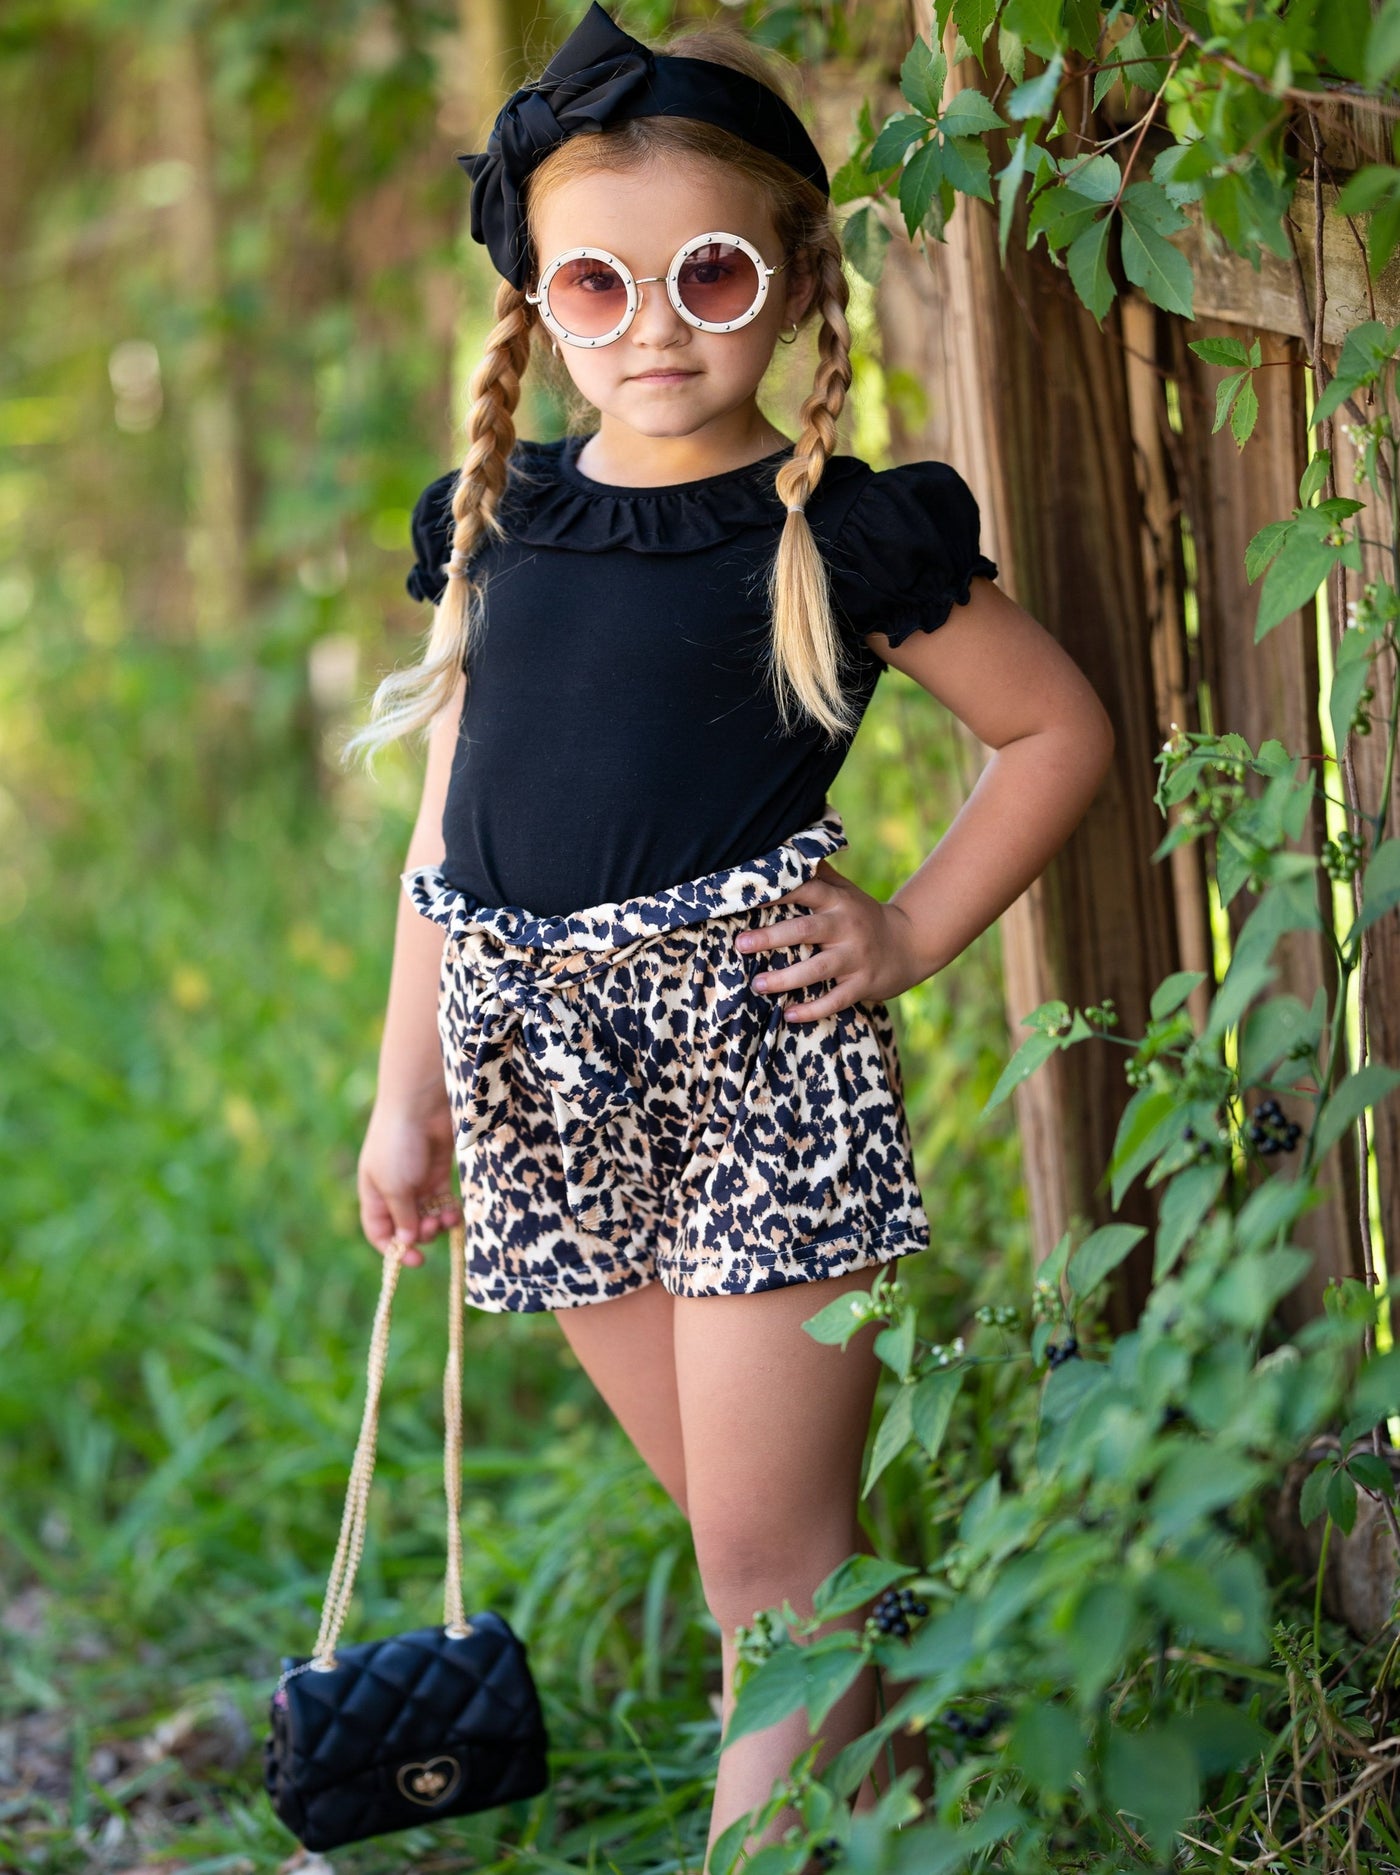 girls set features a black top with a bib and ruffled short sleeves and leopard printed shorts with a sash